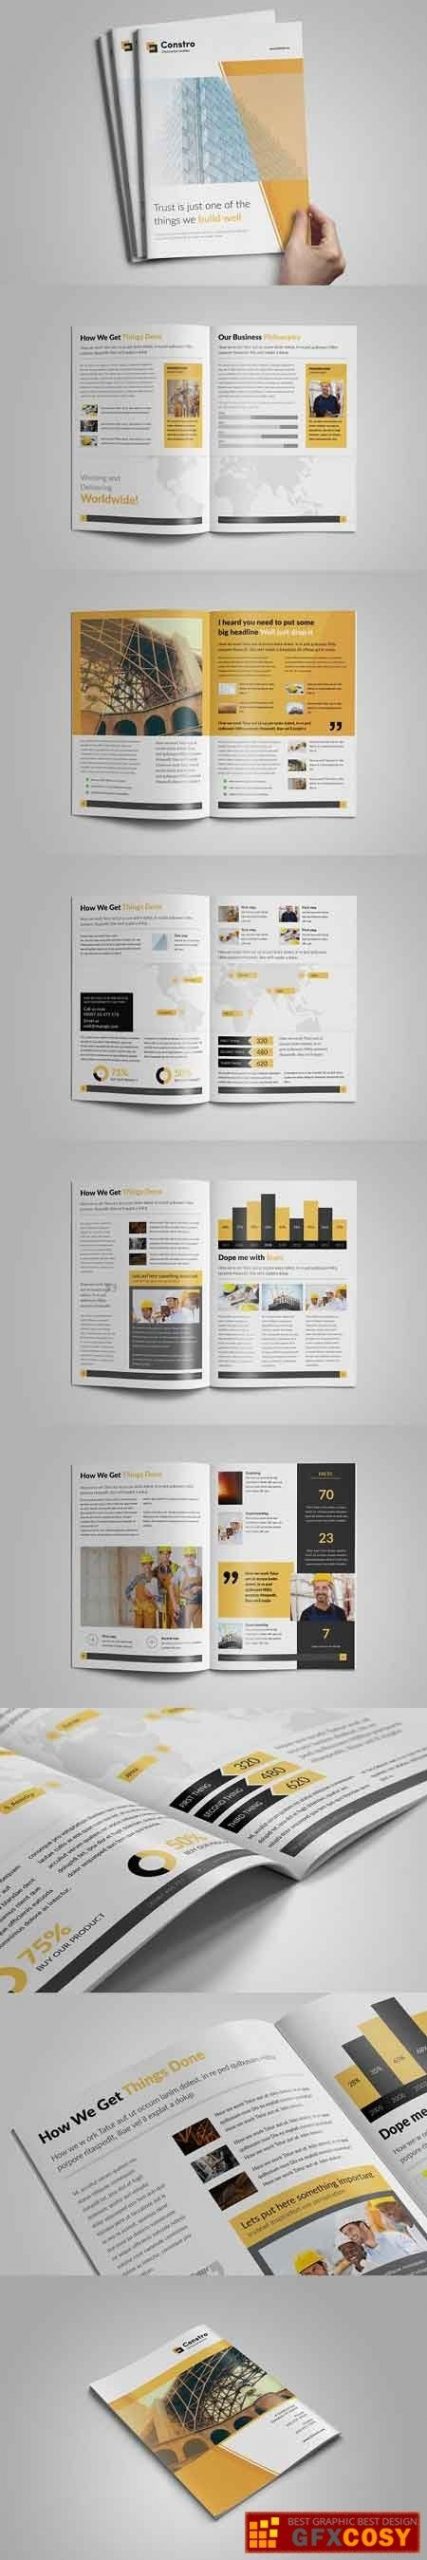 designmax indesign brochure catalogue 12pages 2193540 » free